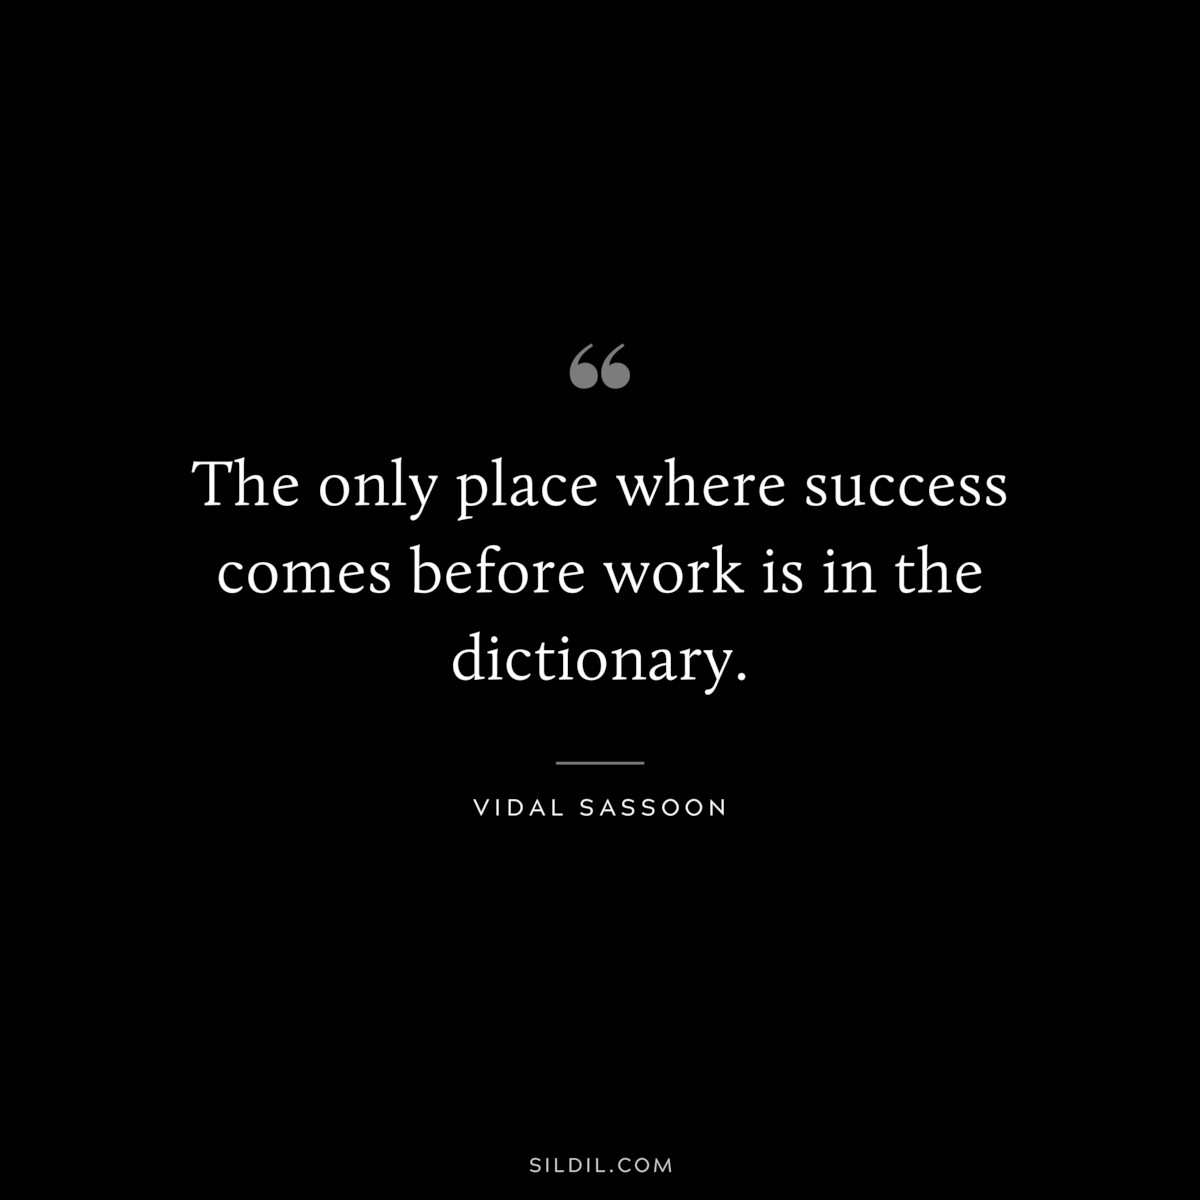 The only place where success comes before work is in the dictionary. ― Vidal Sassoon